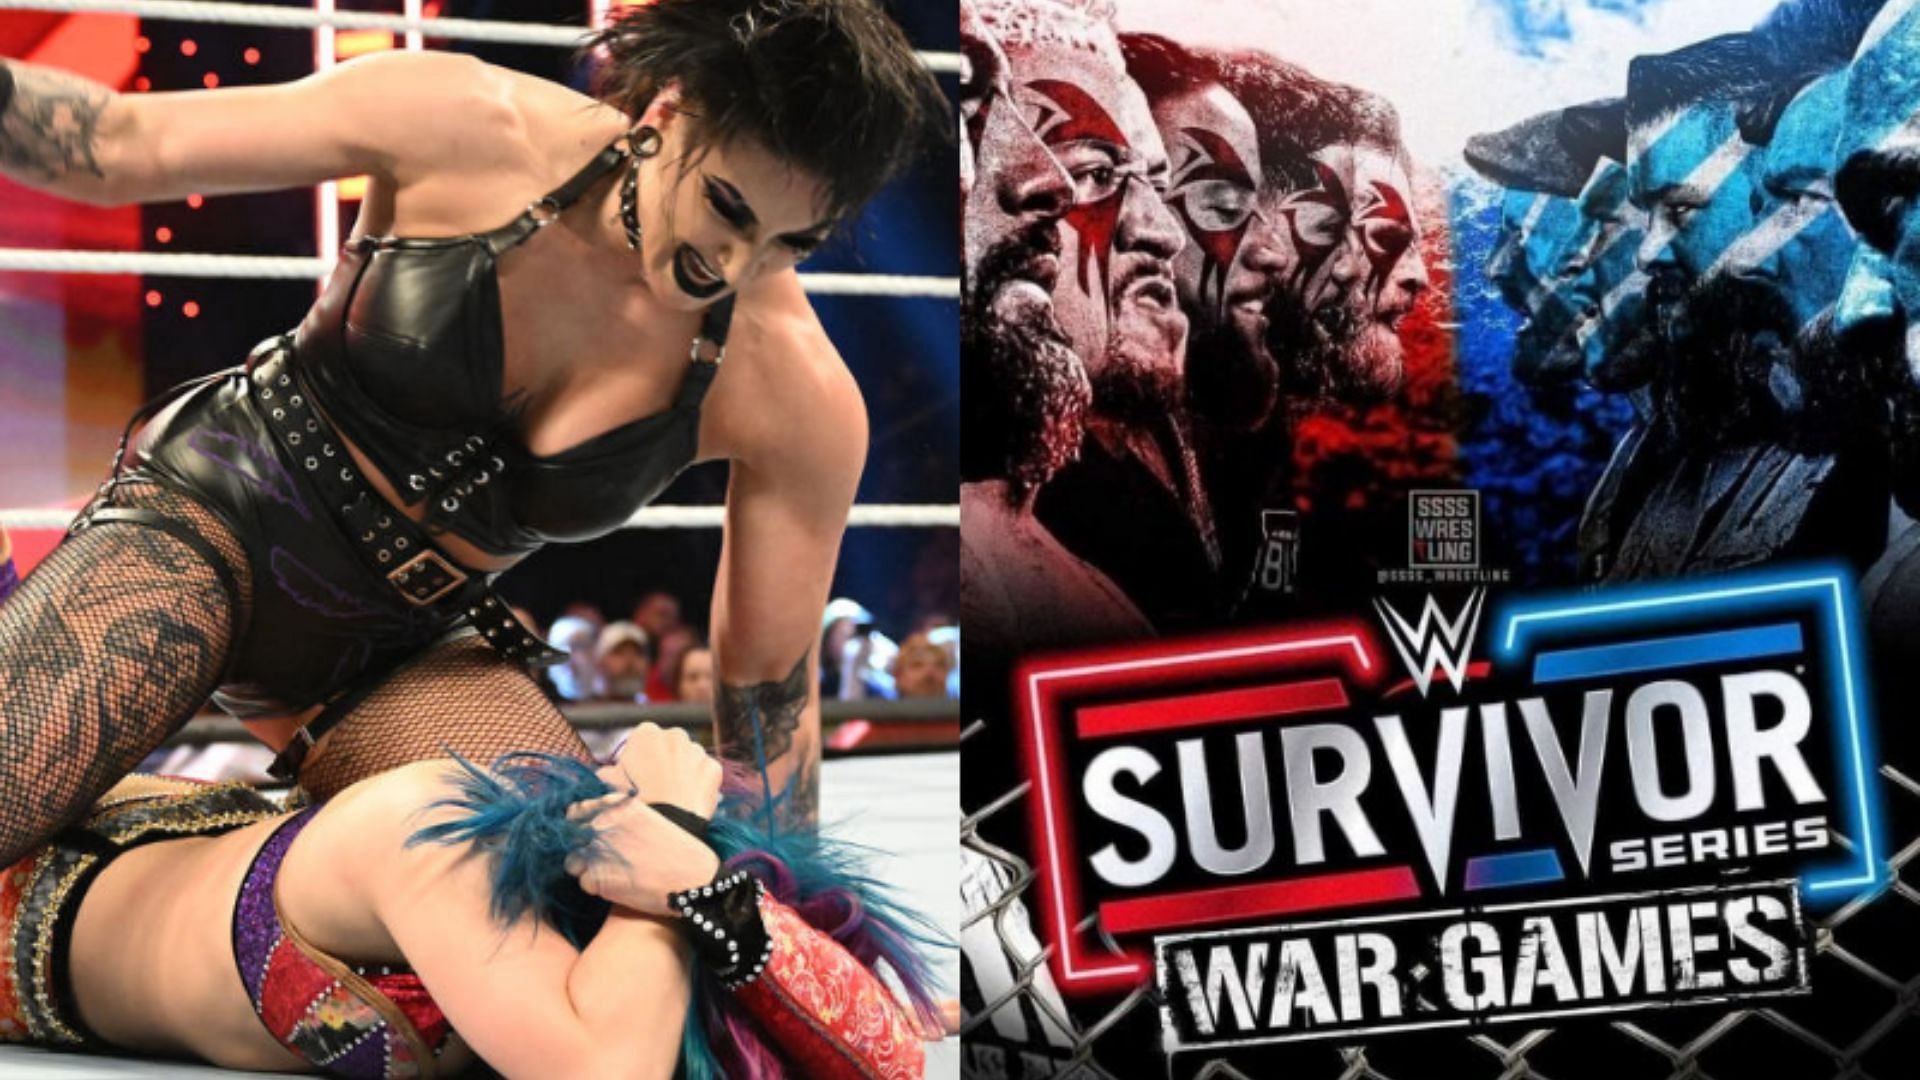 WWE Survivor Series: WarGames 2022 is shaping up to be quite the event!